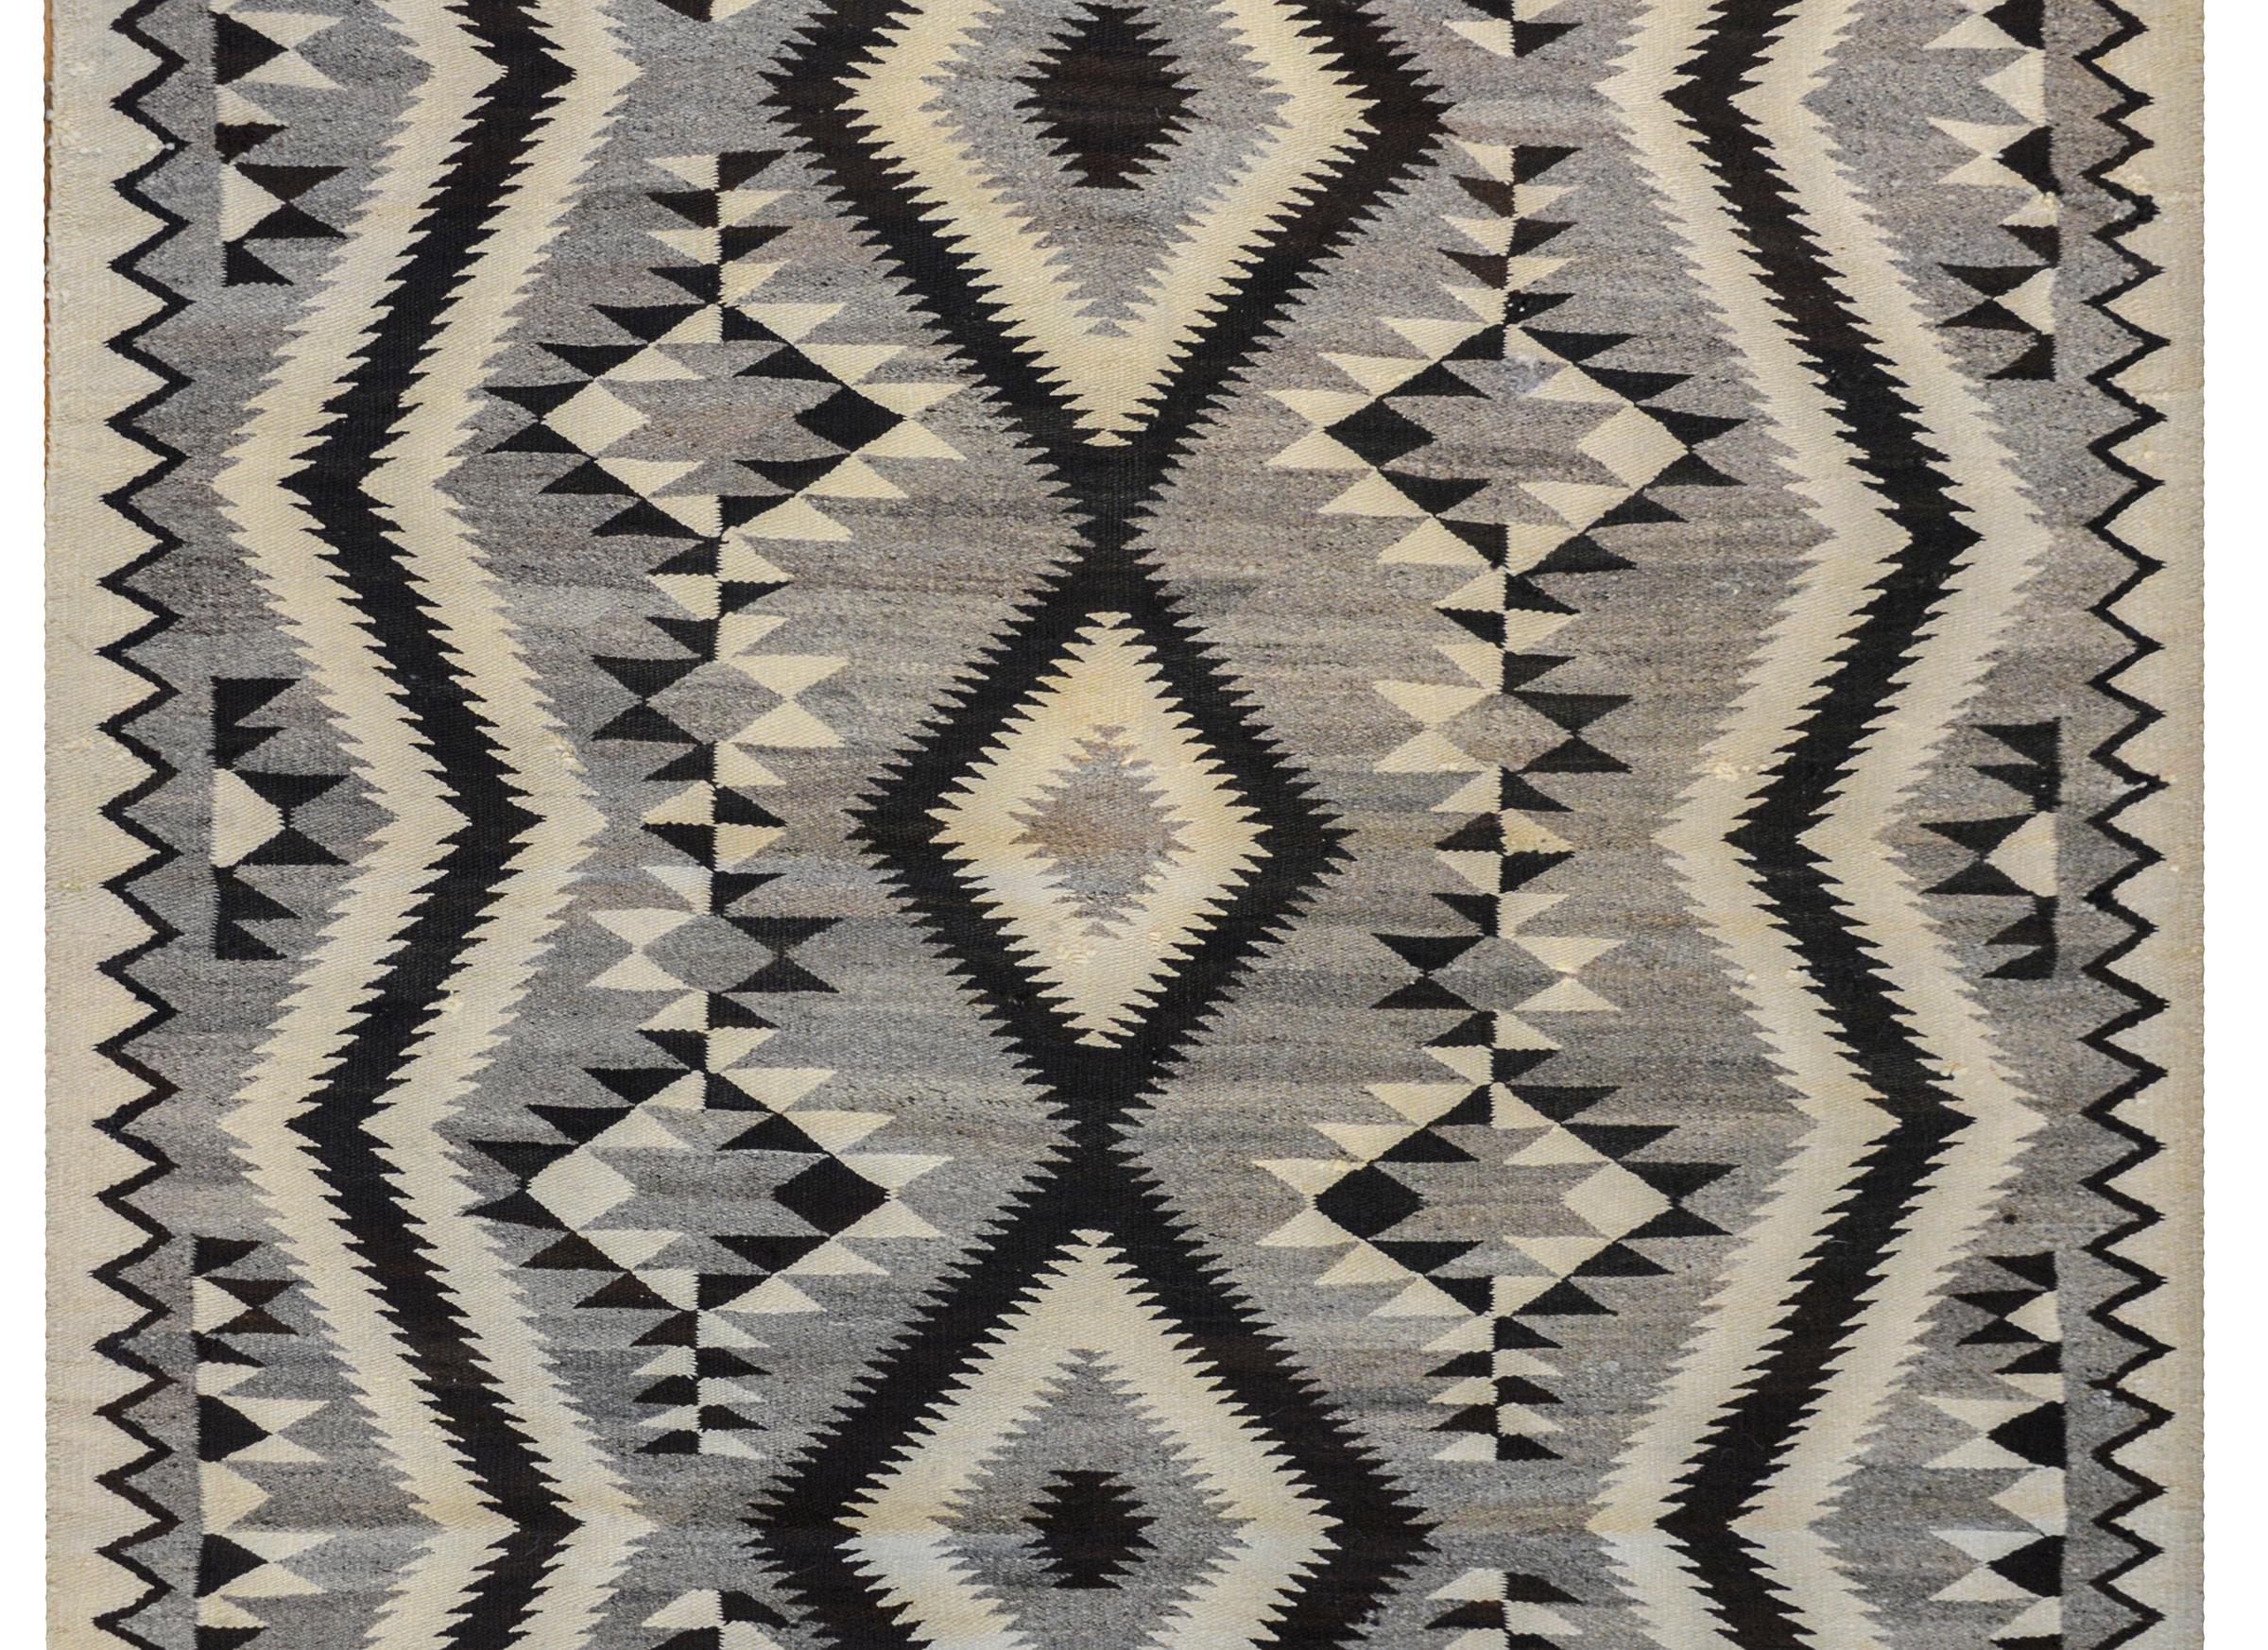 A wonderful early 20th century Navajo rug with an incredible bold black, white, and gray pattern of diamonds and zigzag stripes.